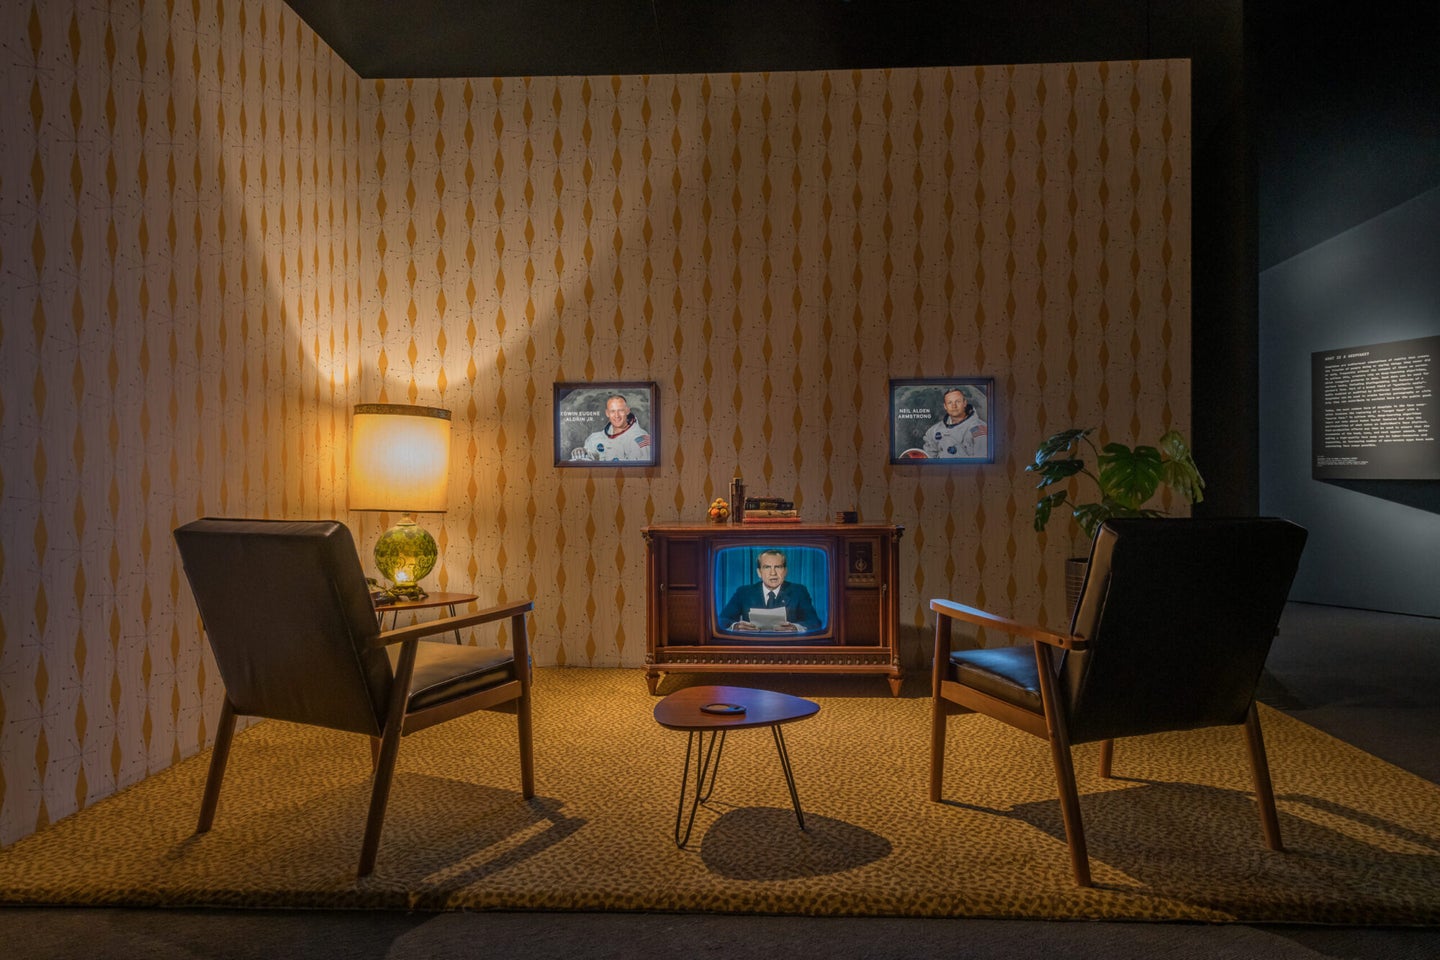 1970s era living room with orange wallpaper, two chairs and a TV with a deepfake of Nixon playing.